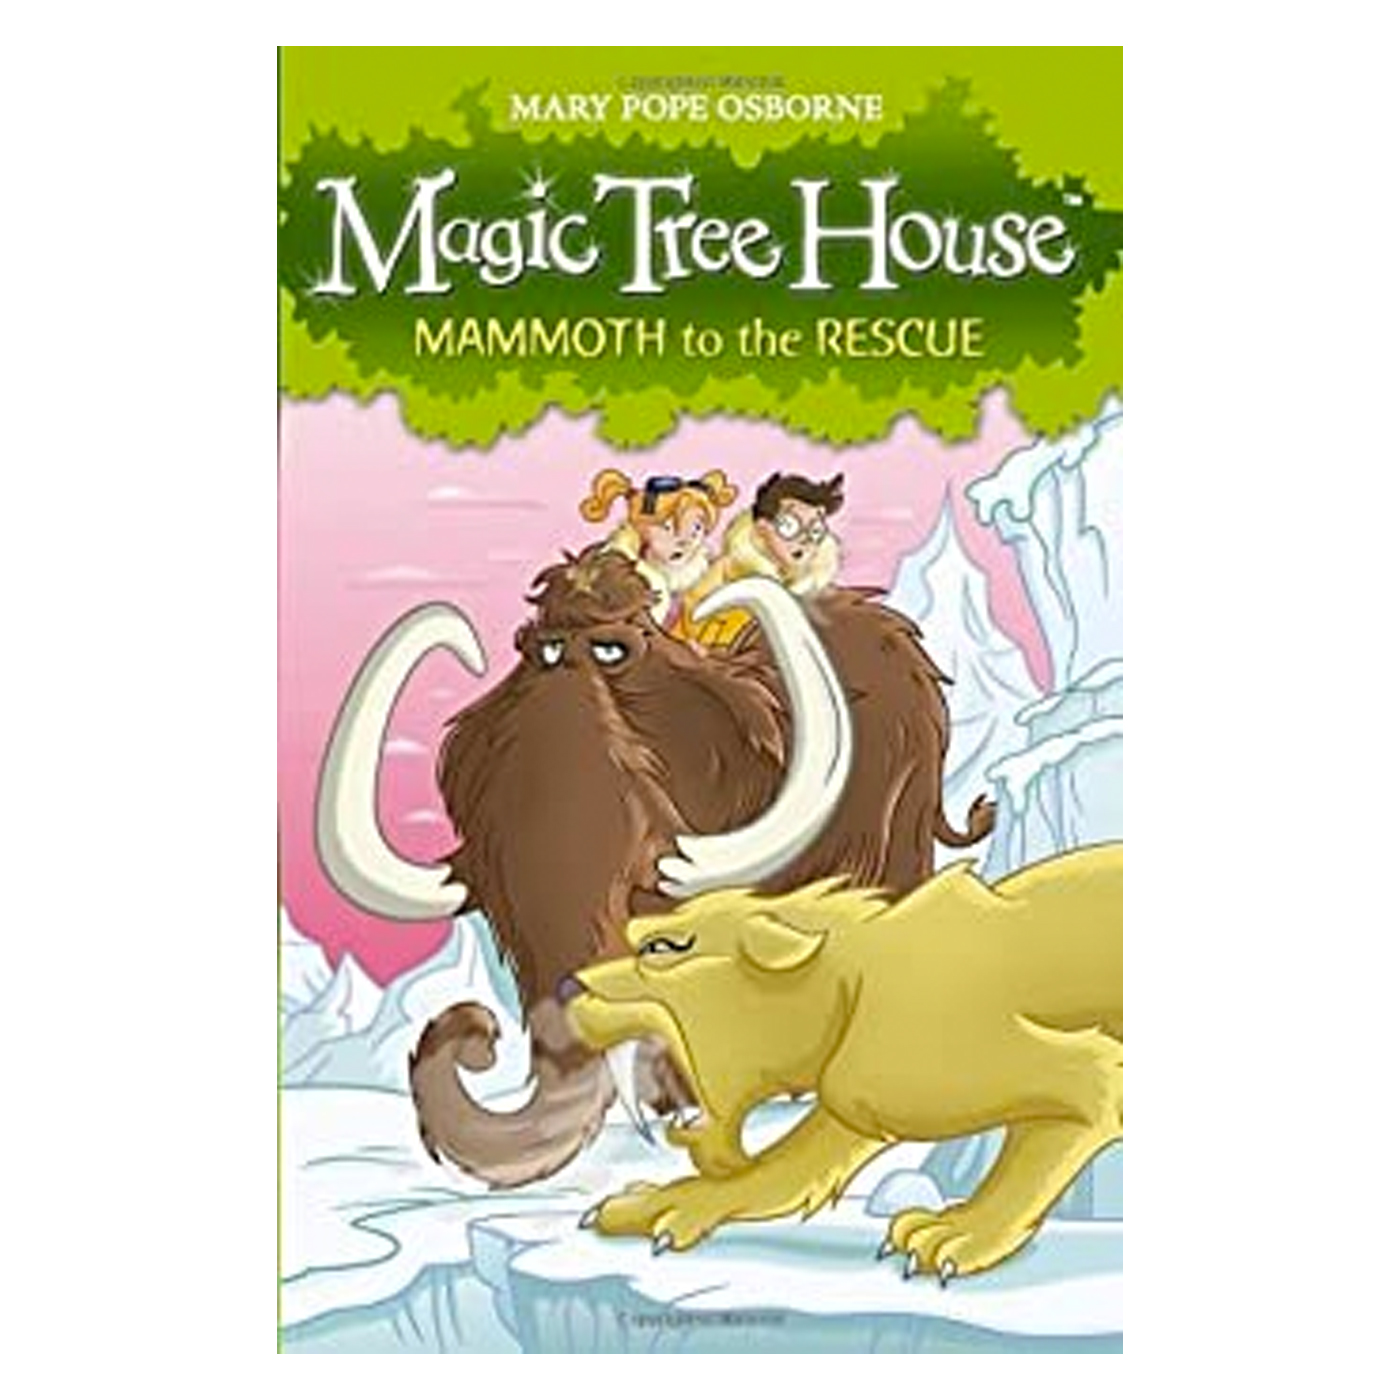  Magic Tree House 7: Mammoth to the Rescue